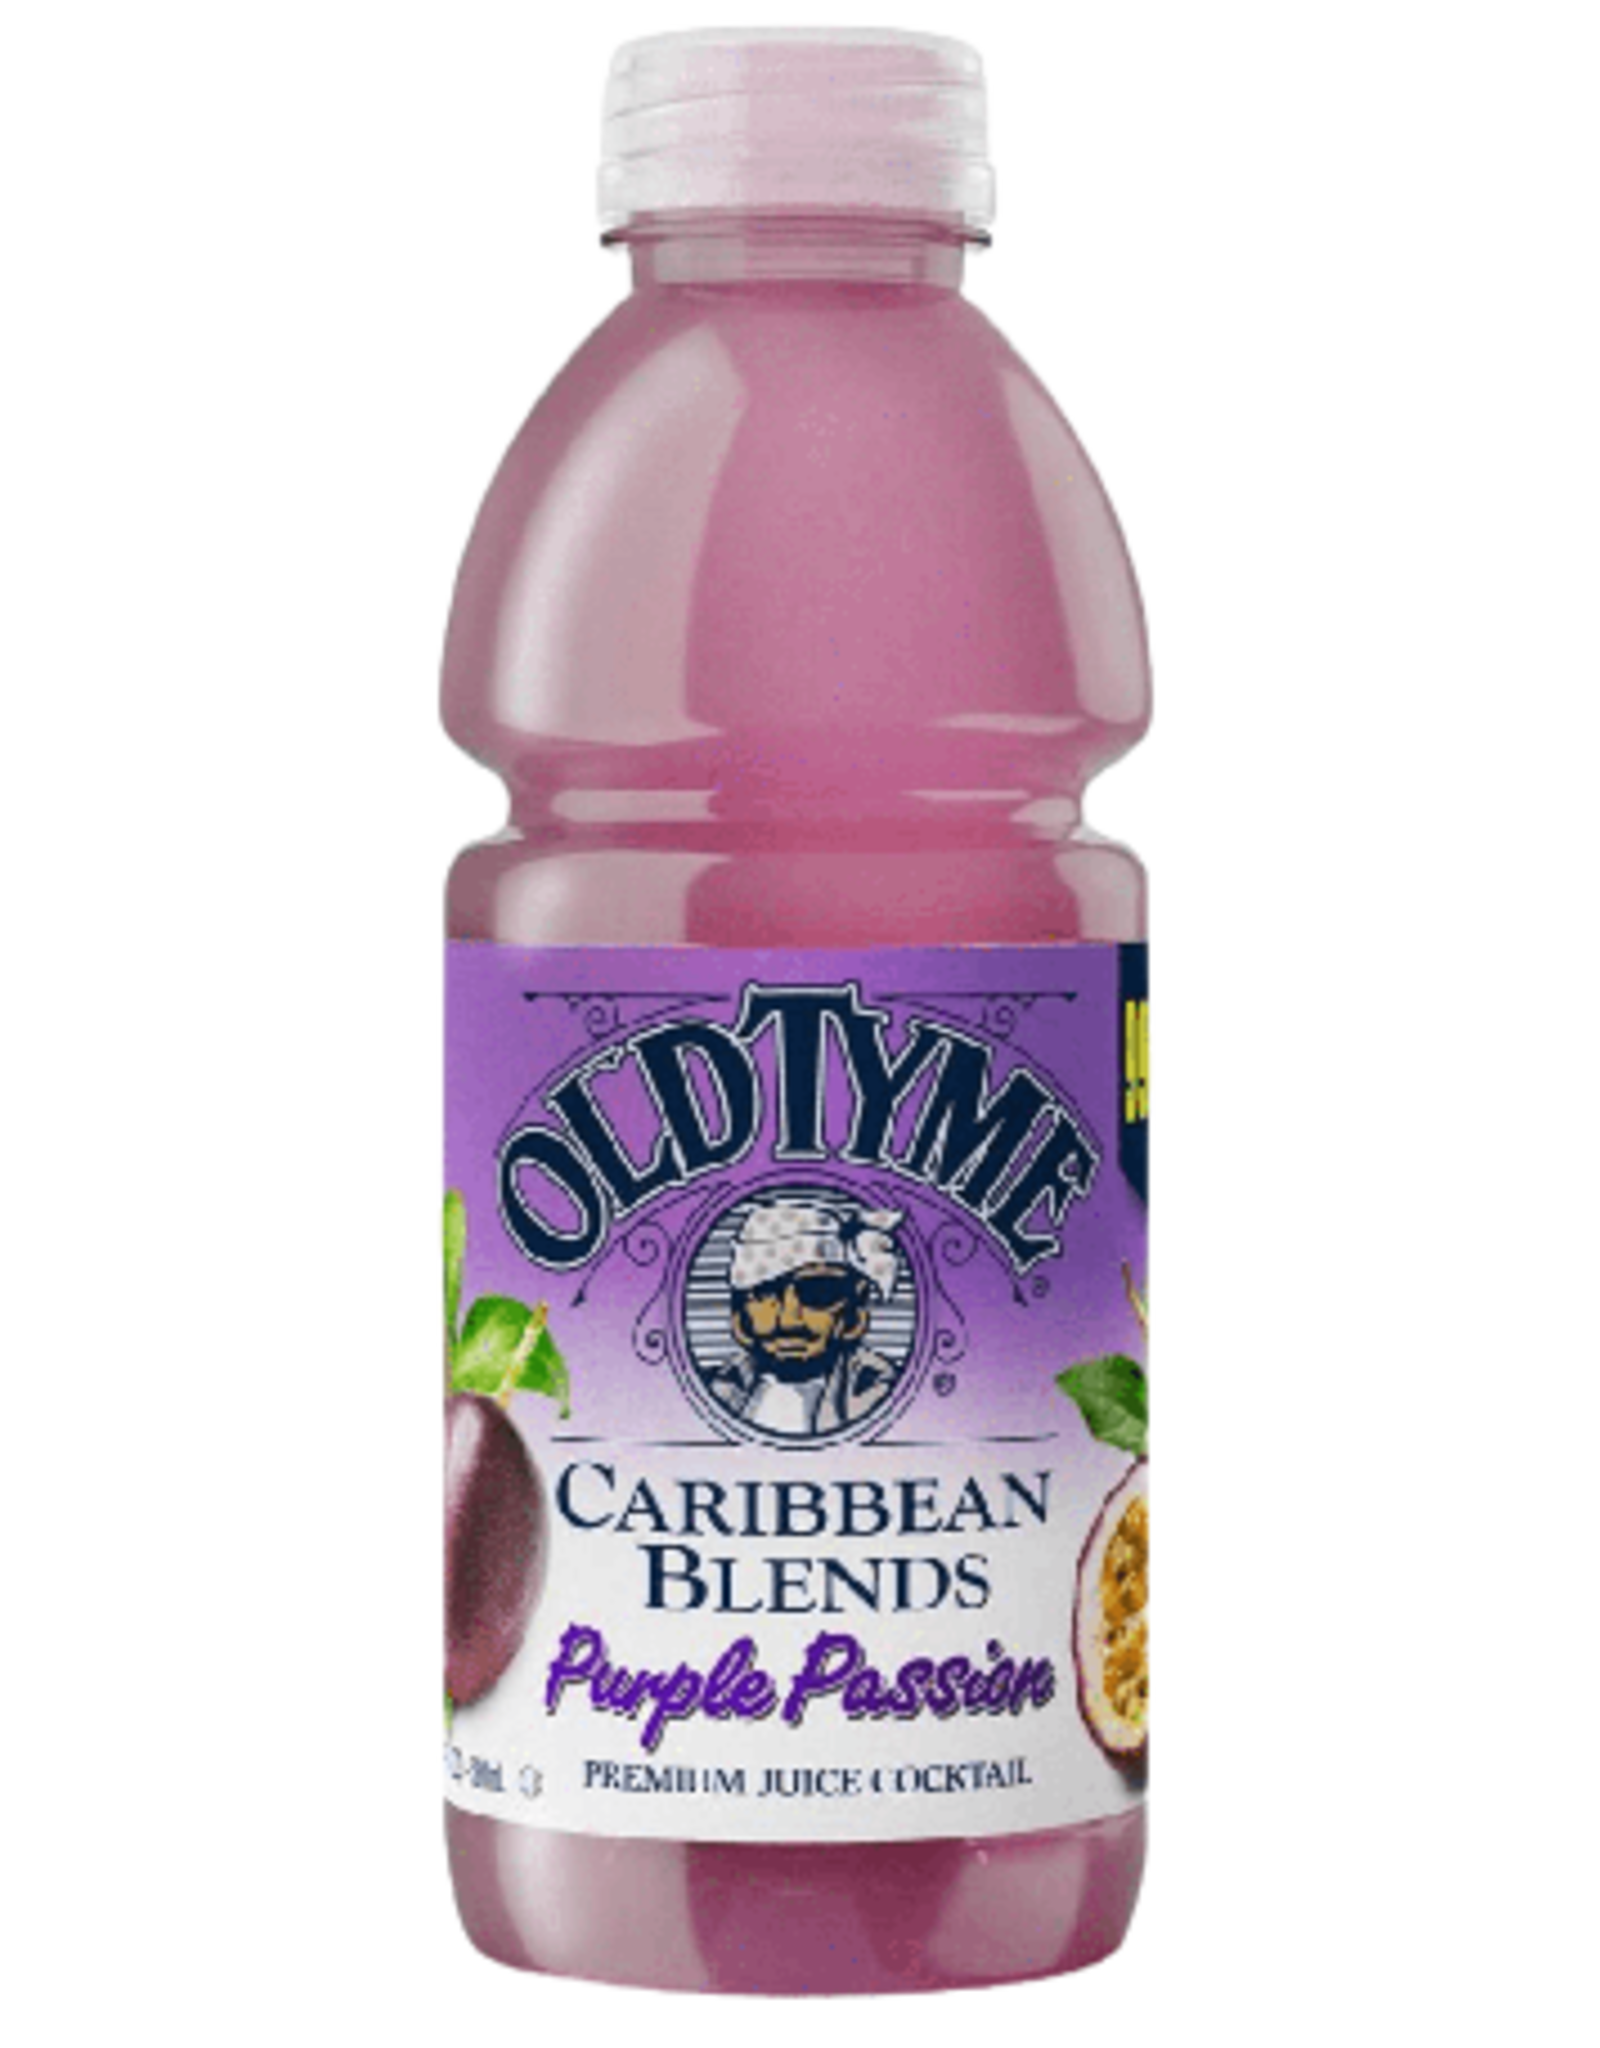 Old Tyme Caribbean Blends Purple Passion